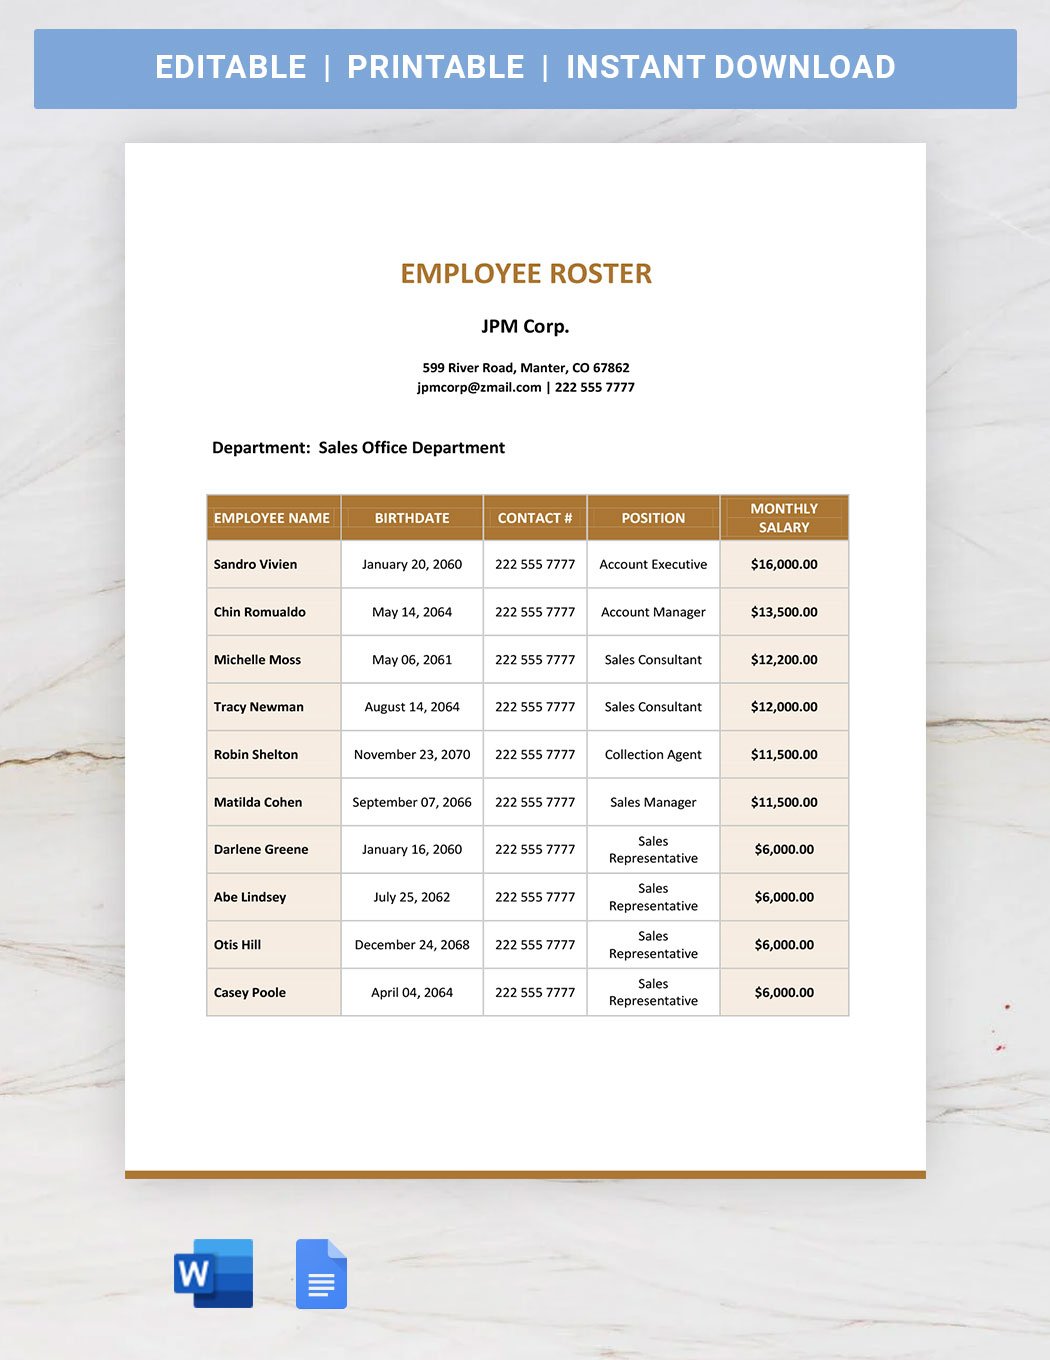 Blank Employee Roster Template